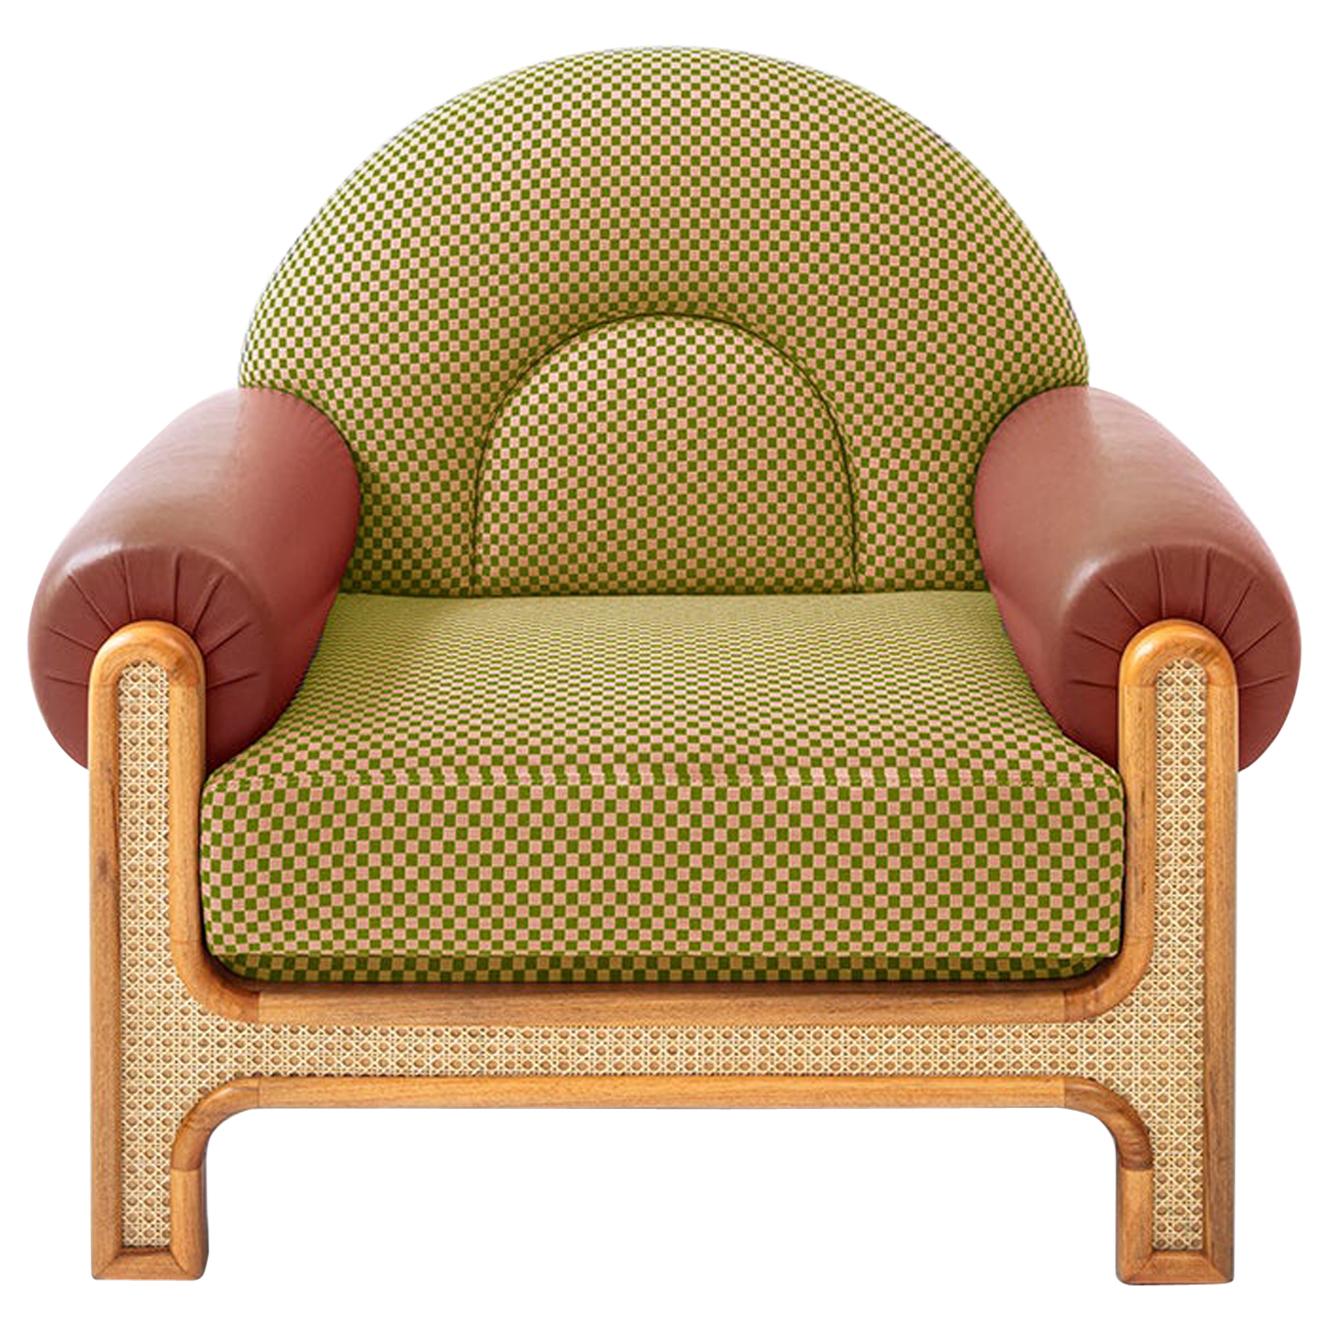 N-Gene Armchair with Green Checker Fabric and Purple Leather